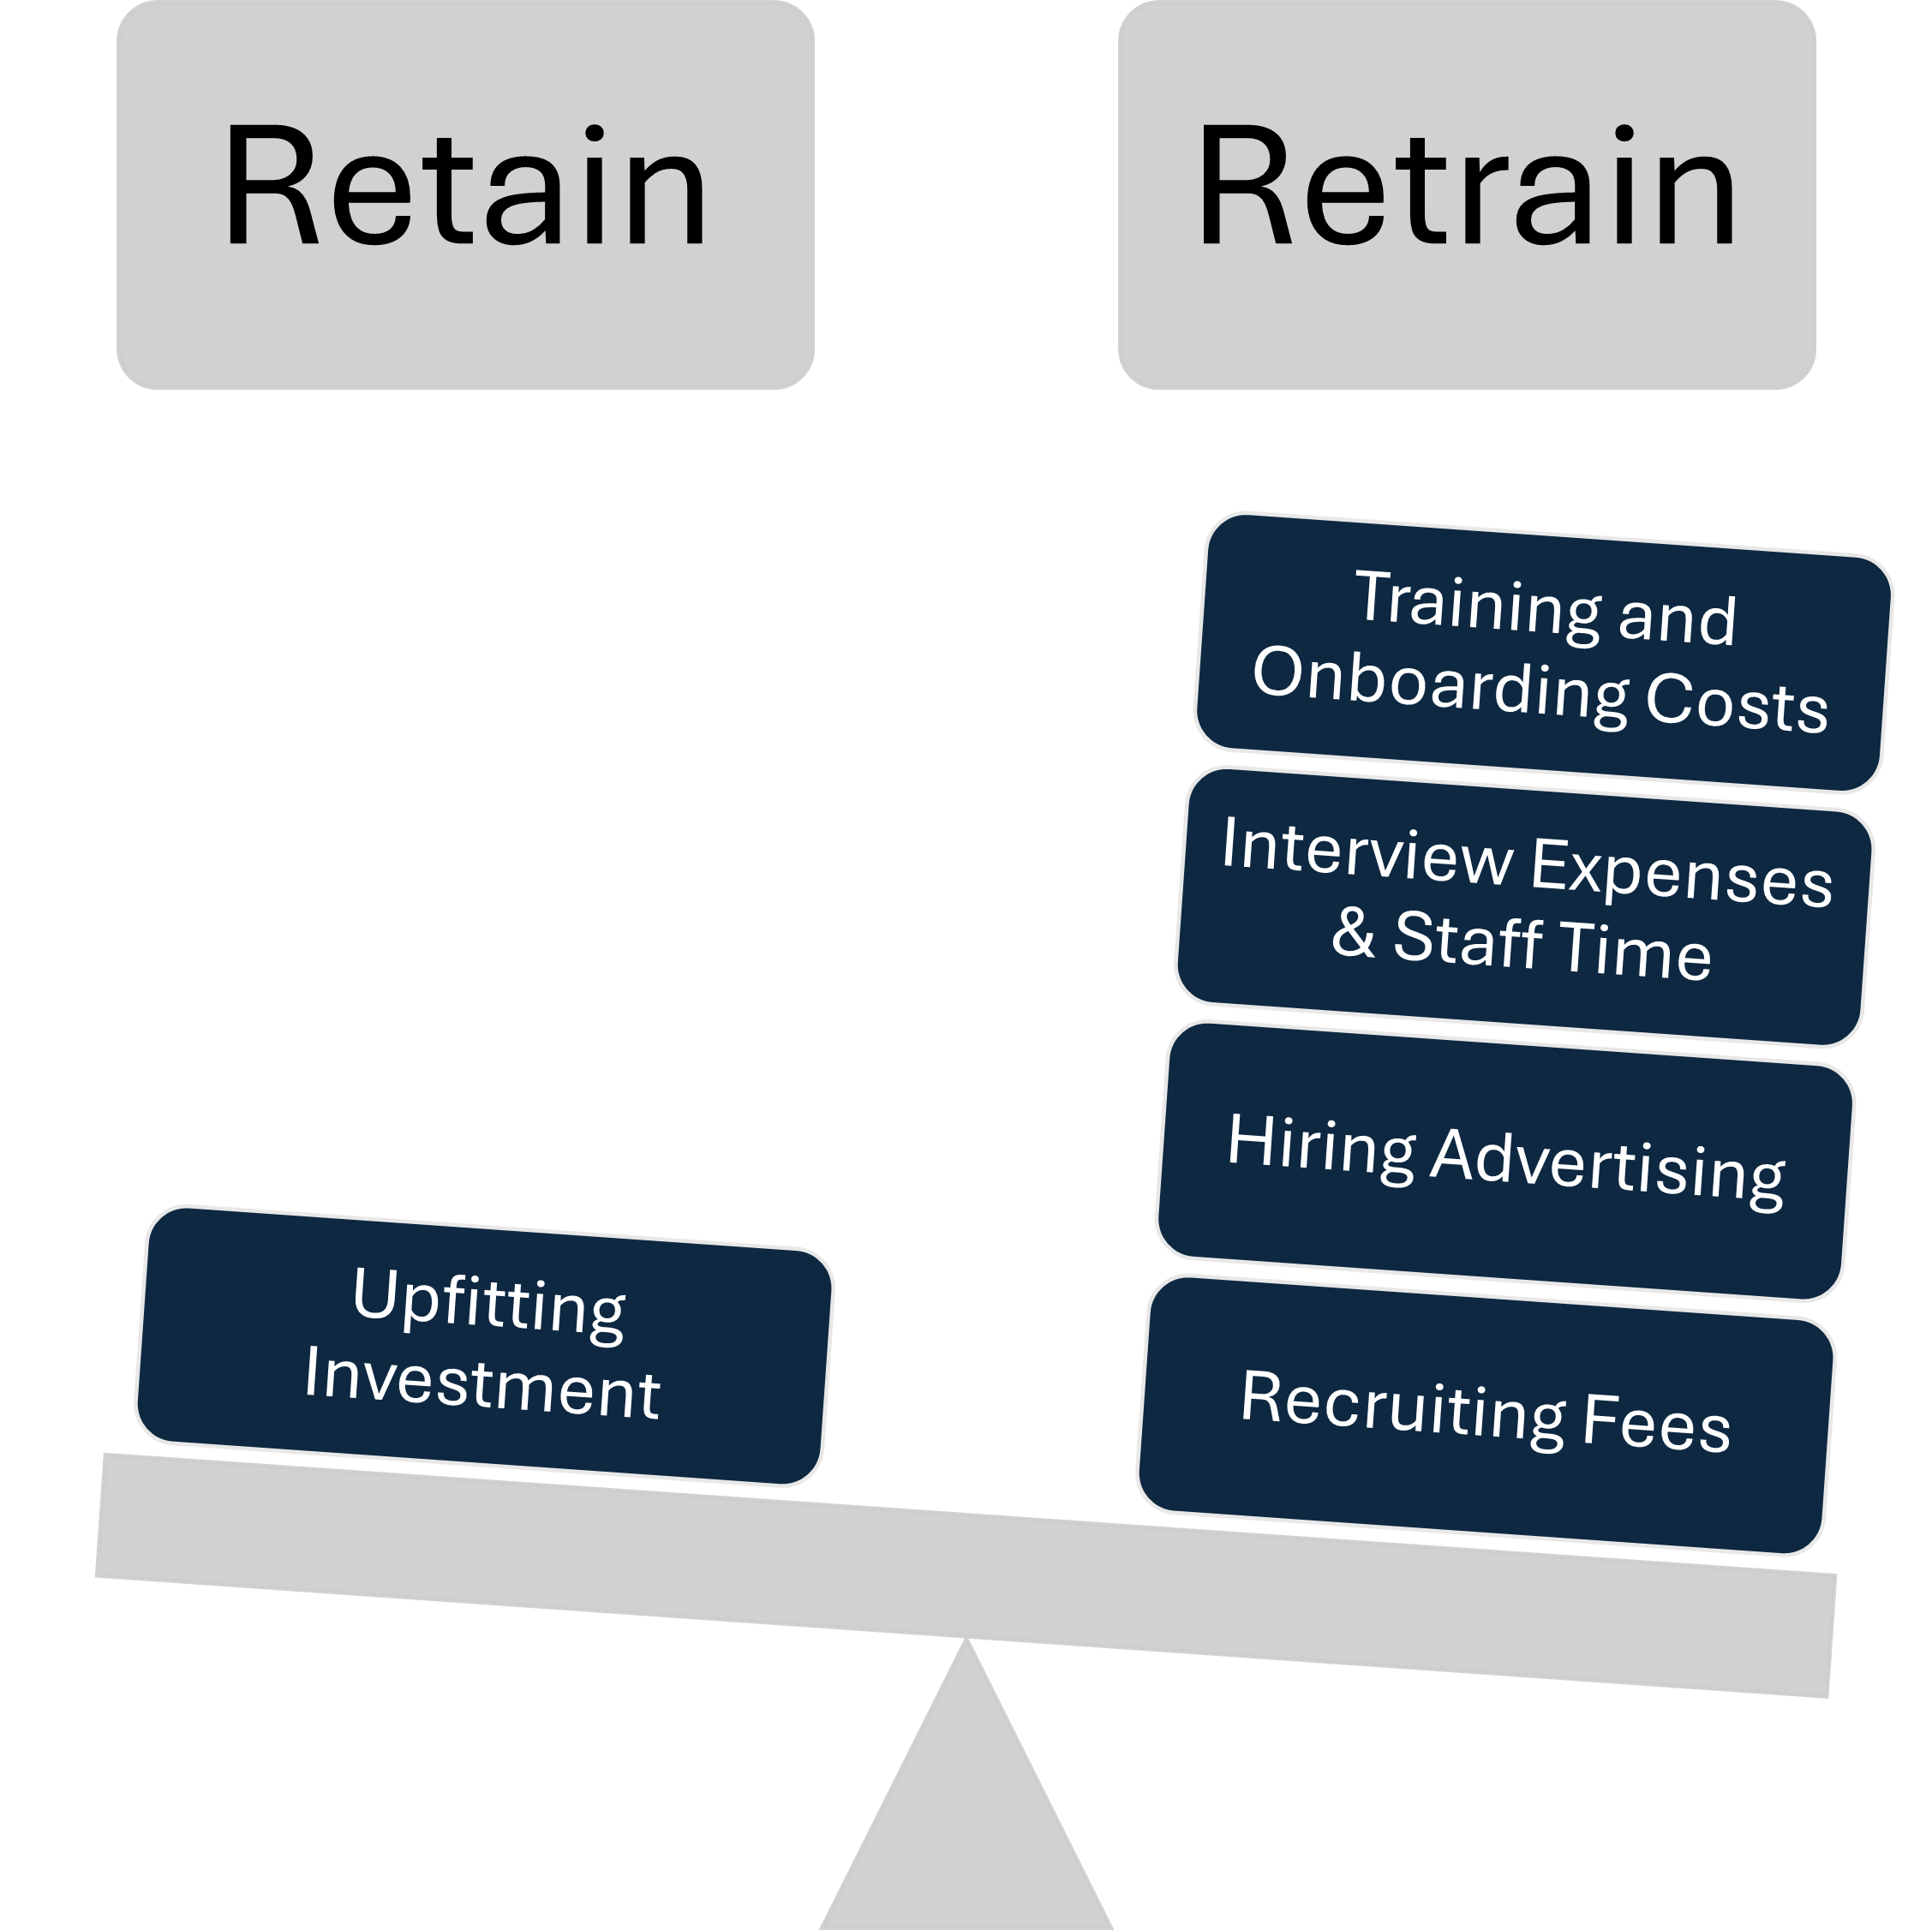 Diagram illustrating the cost comparison between retaining versus retraining employees. The base of the diagram is labeled 'Upfitting Investment', supporting two columns. The left column, labeled 'Retain', shows a direct investment path, while the right column, labeled 'Retrain', is broken down into costs for 'Training and Onboarding', 'Interview Expenses & Staff Time', 'Hiring Advertising', and 'Recruiting Fees'.